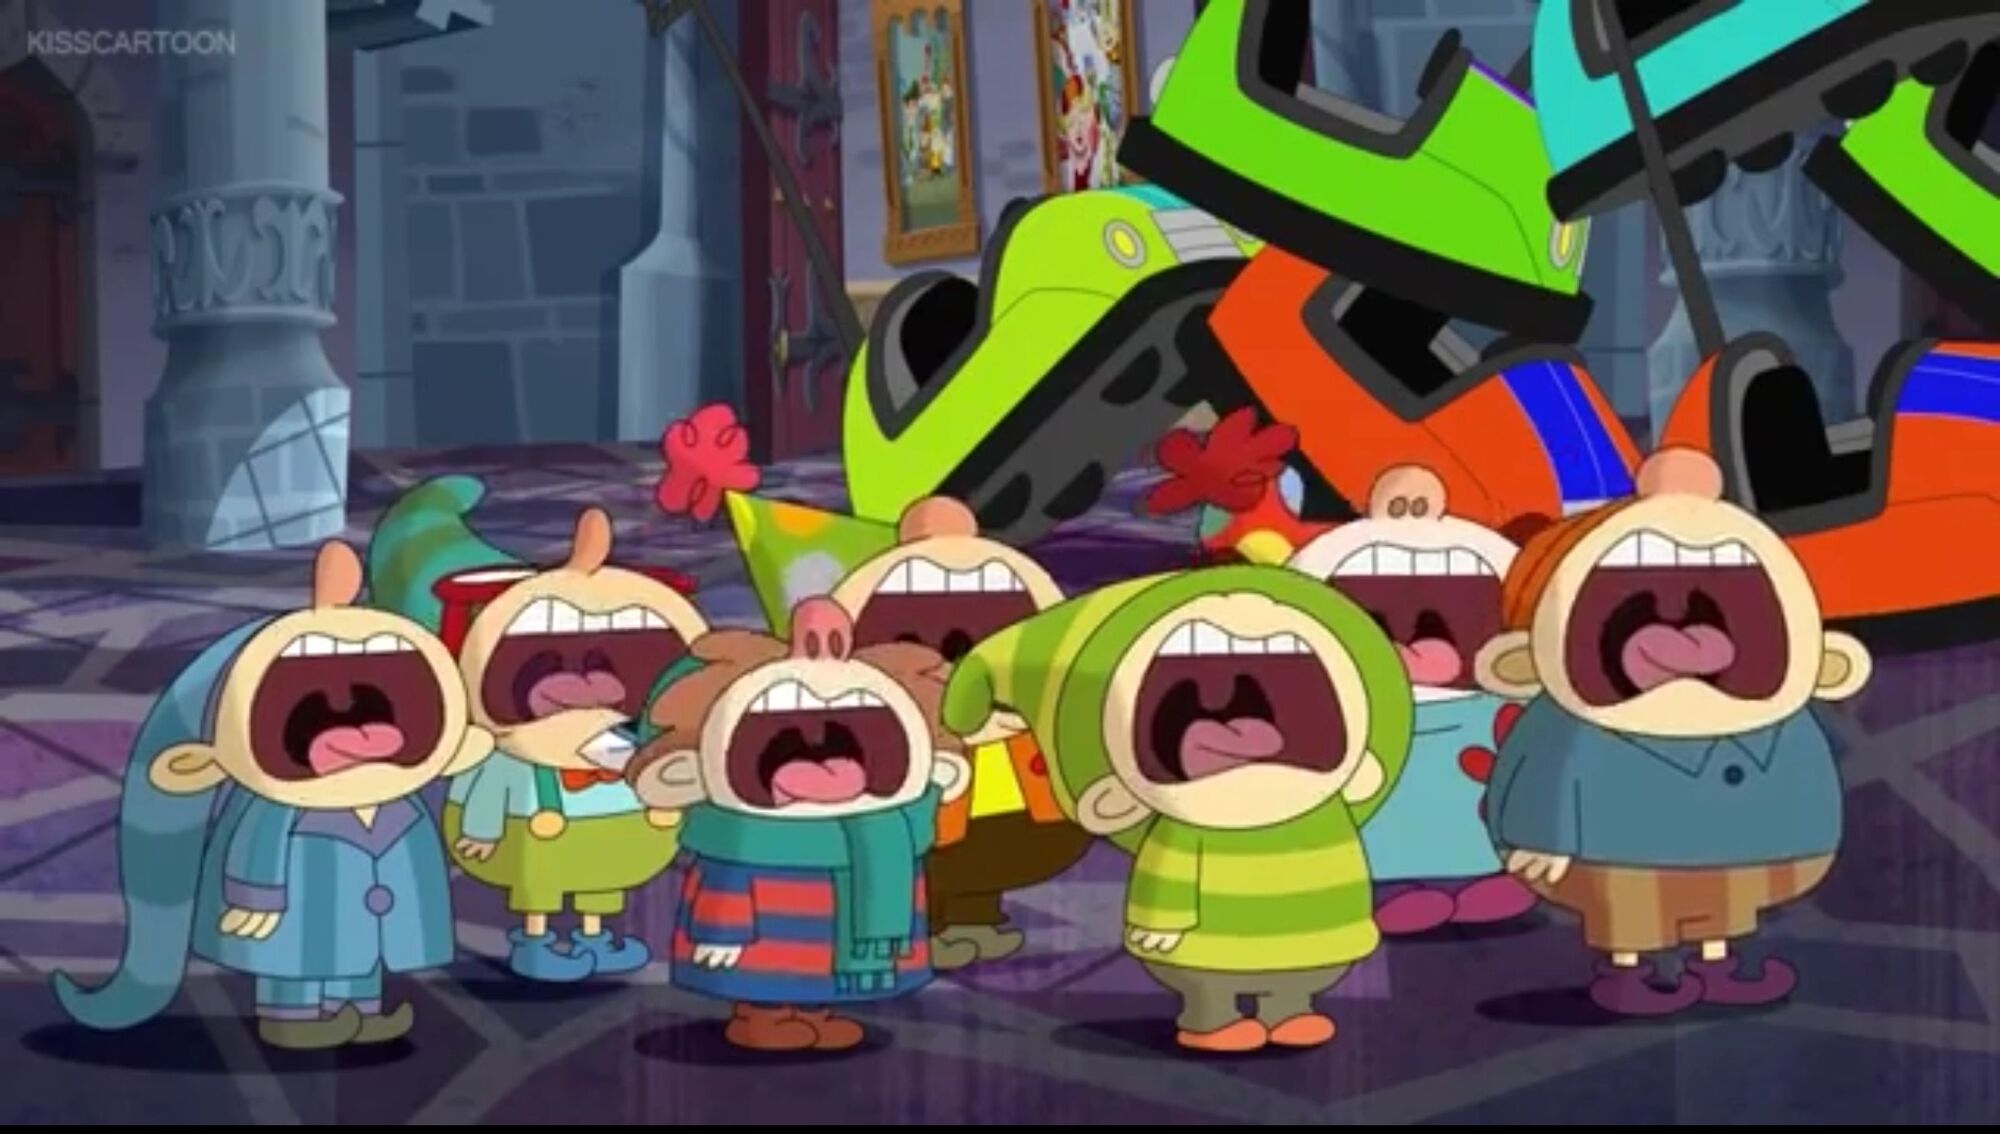 Image S2e13b The 7d Crying The 7d Wiki Fandom Powered By Wikia 